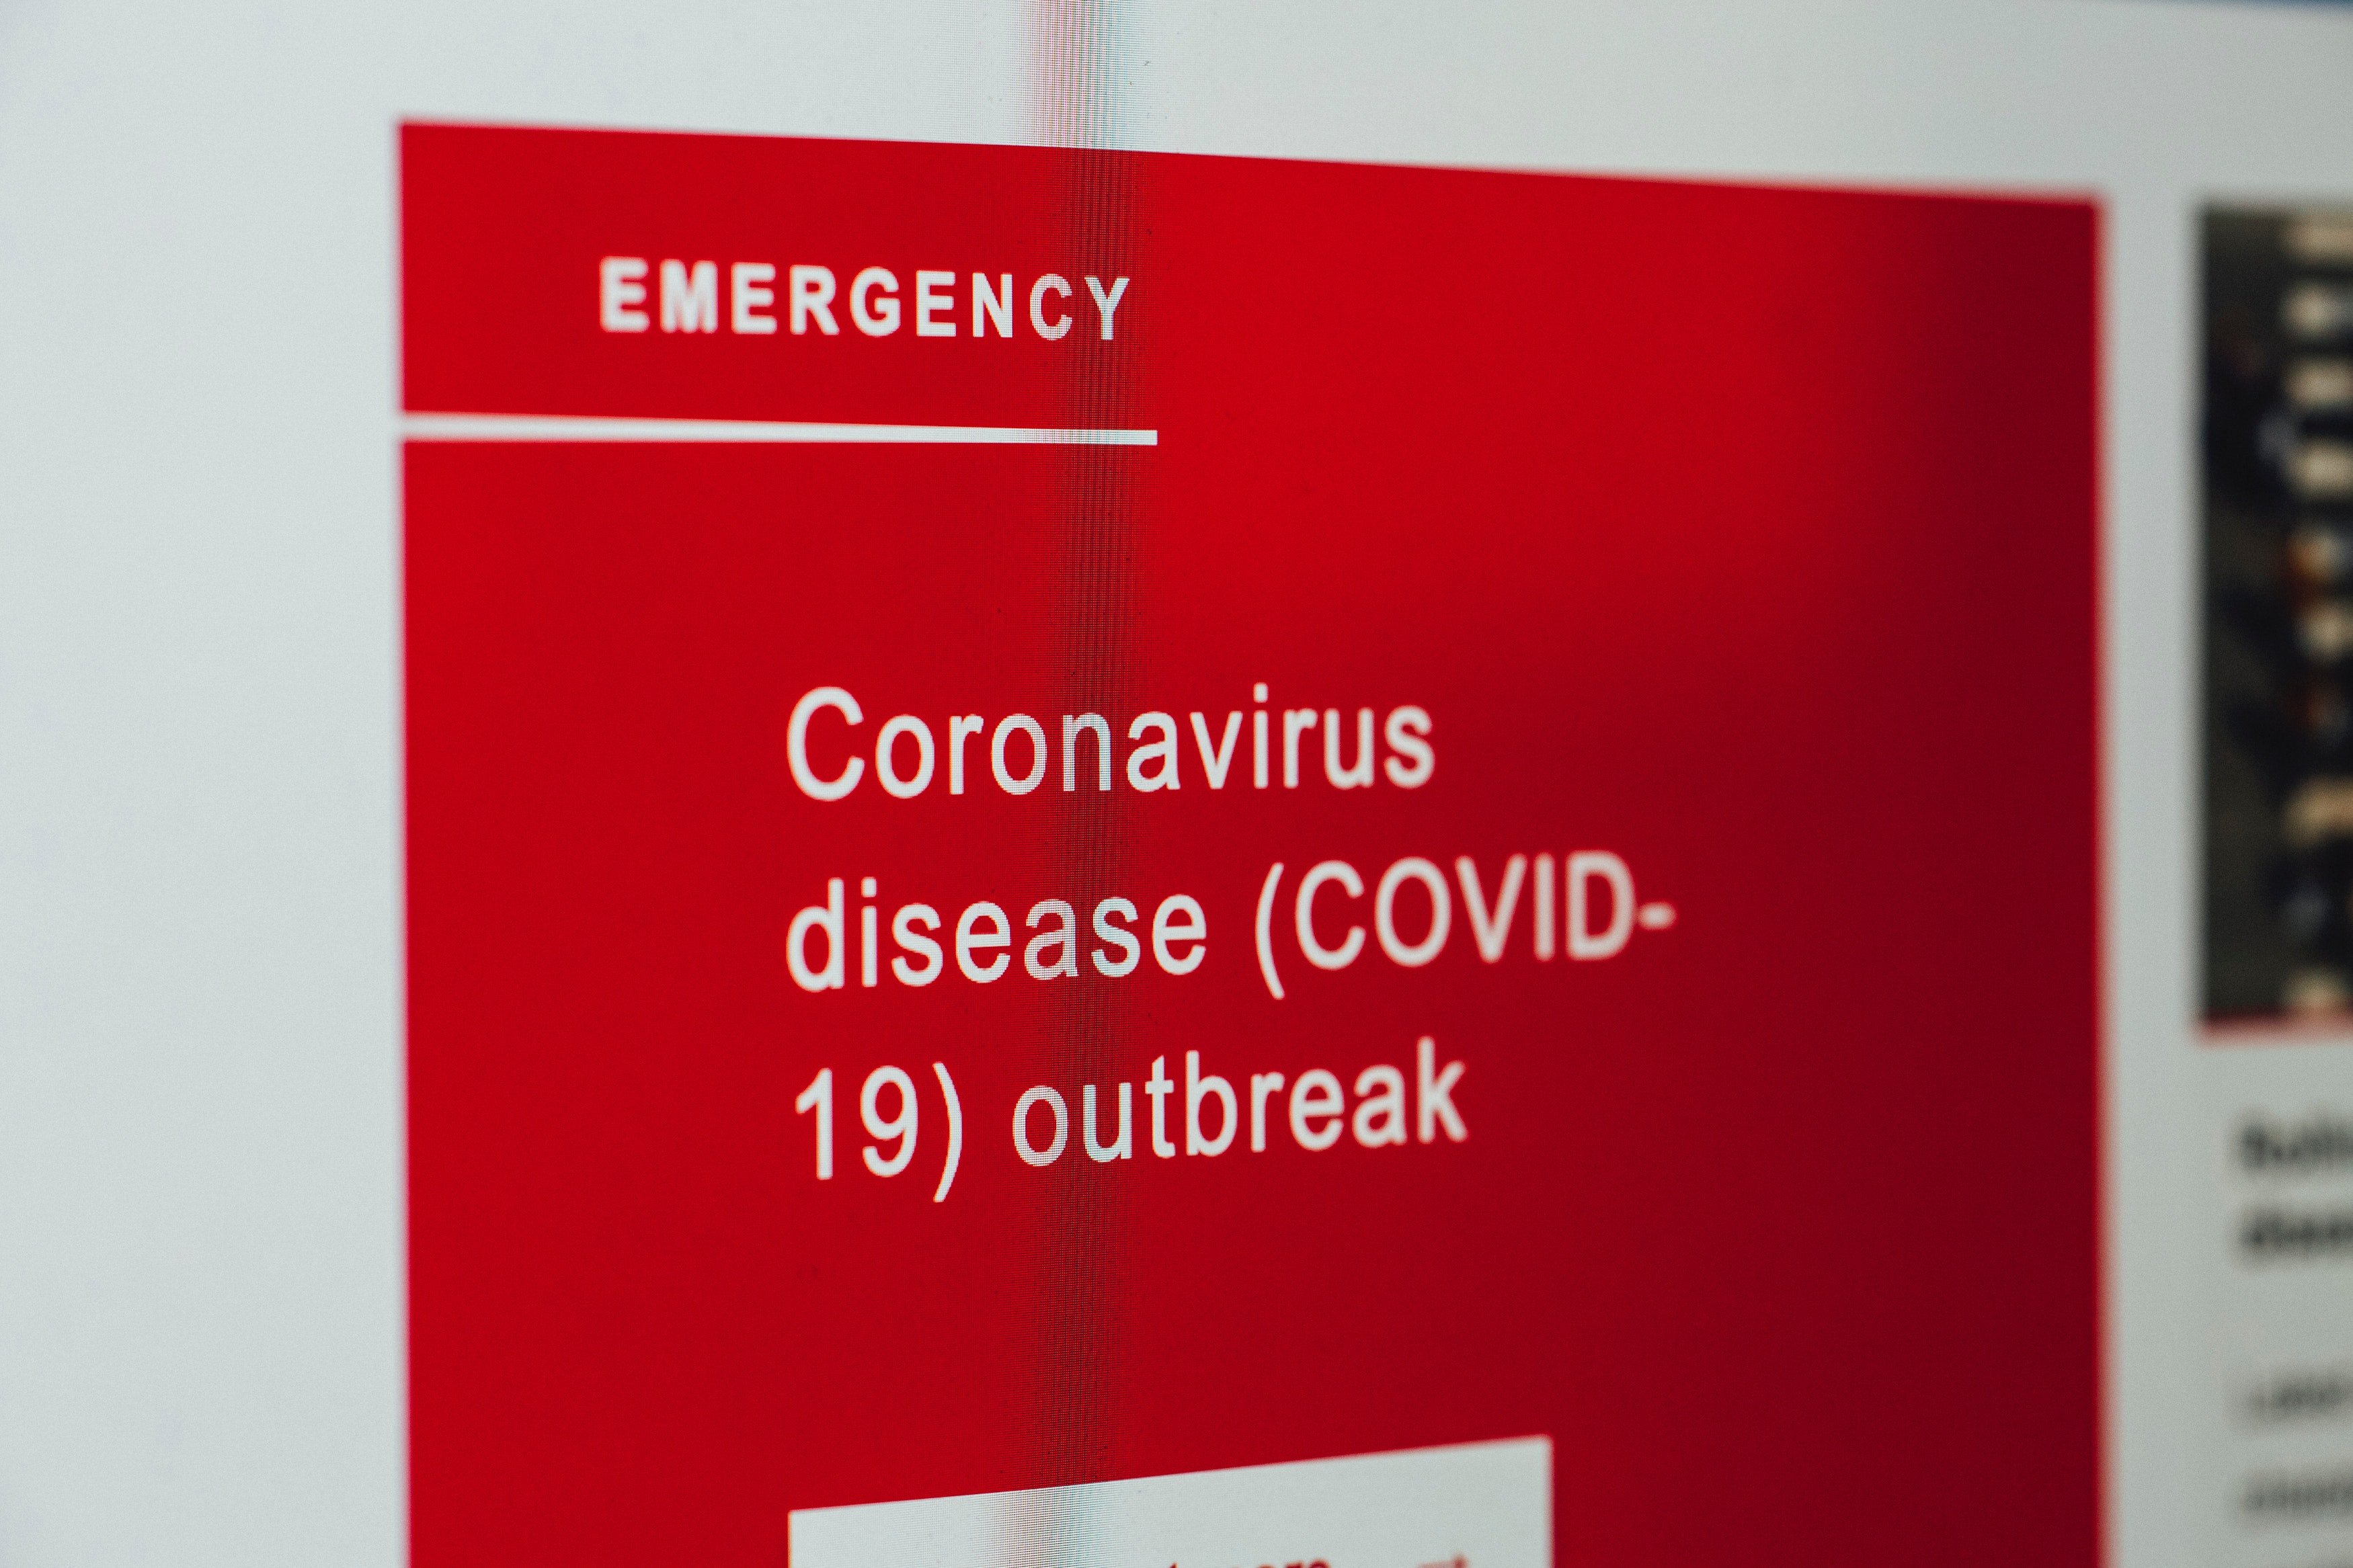 A COVID-19 emergency message card. | Source: Pexels